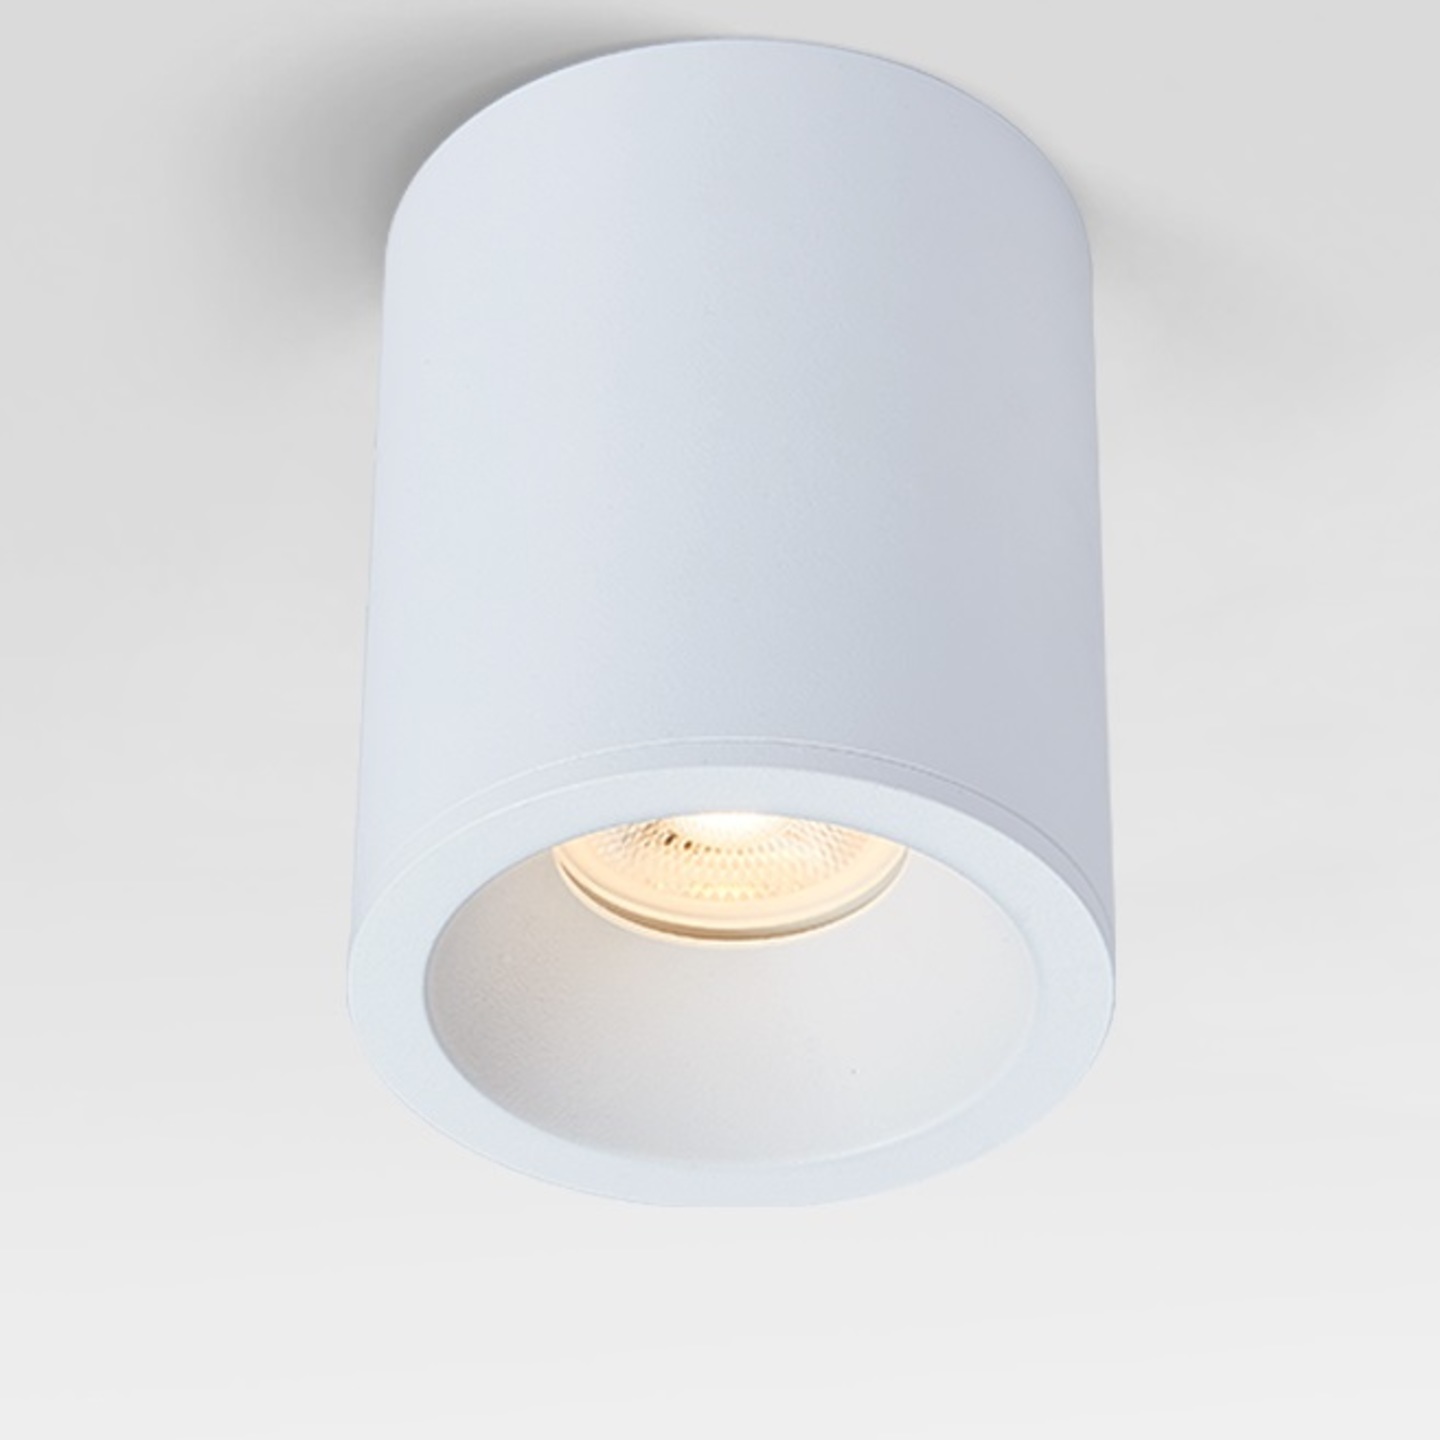 Ceiling Mounted Round Spotlight Outdoor